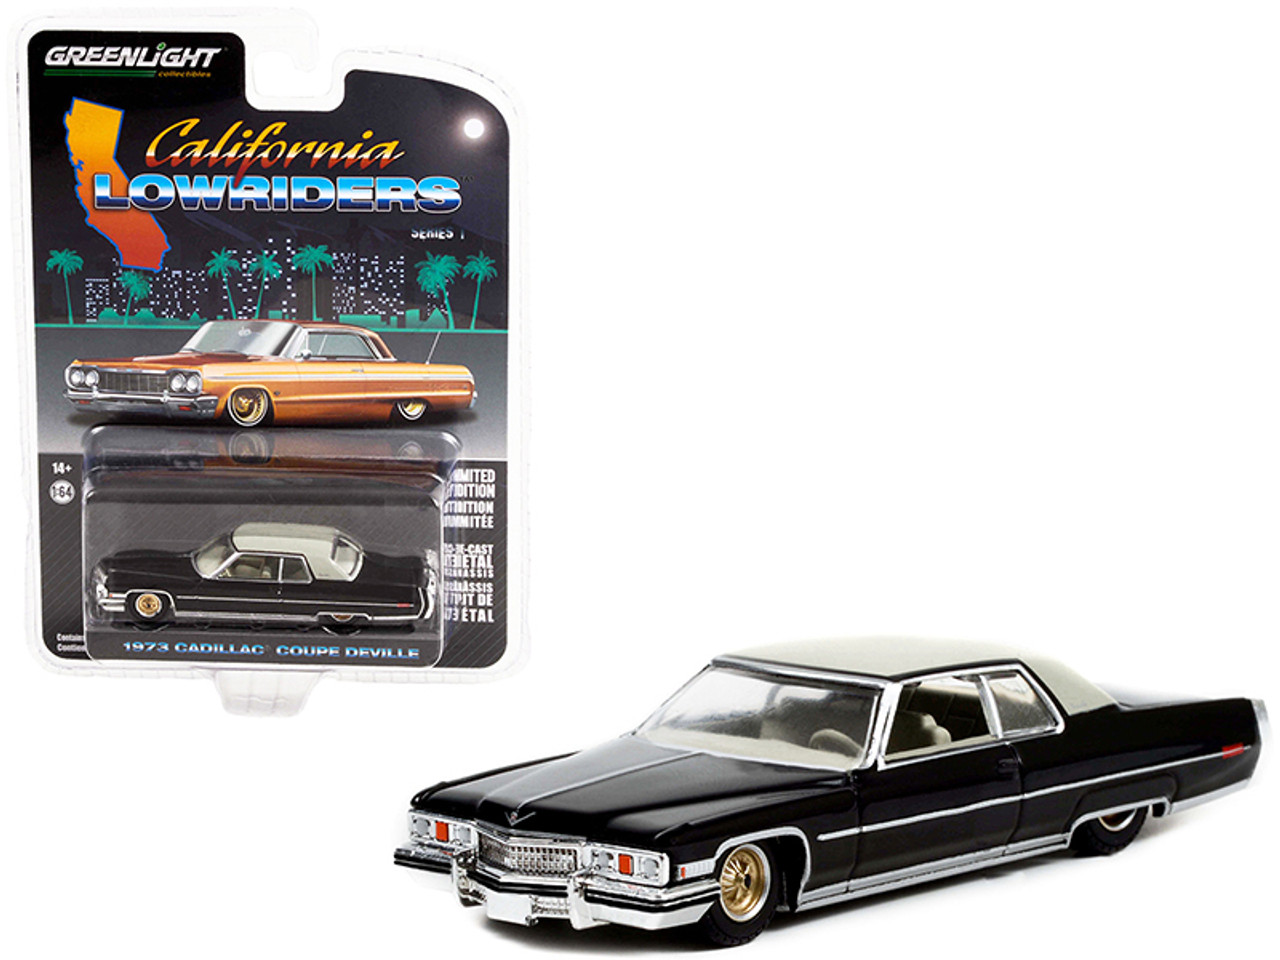 1973 Cadillac Coupe DeVille Lowrider Black with Cream Top and Gold Wheels "California Lowriders" Release 1 1/64 Diecast Model Car by Greenlight